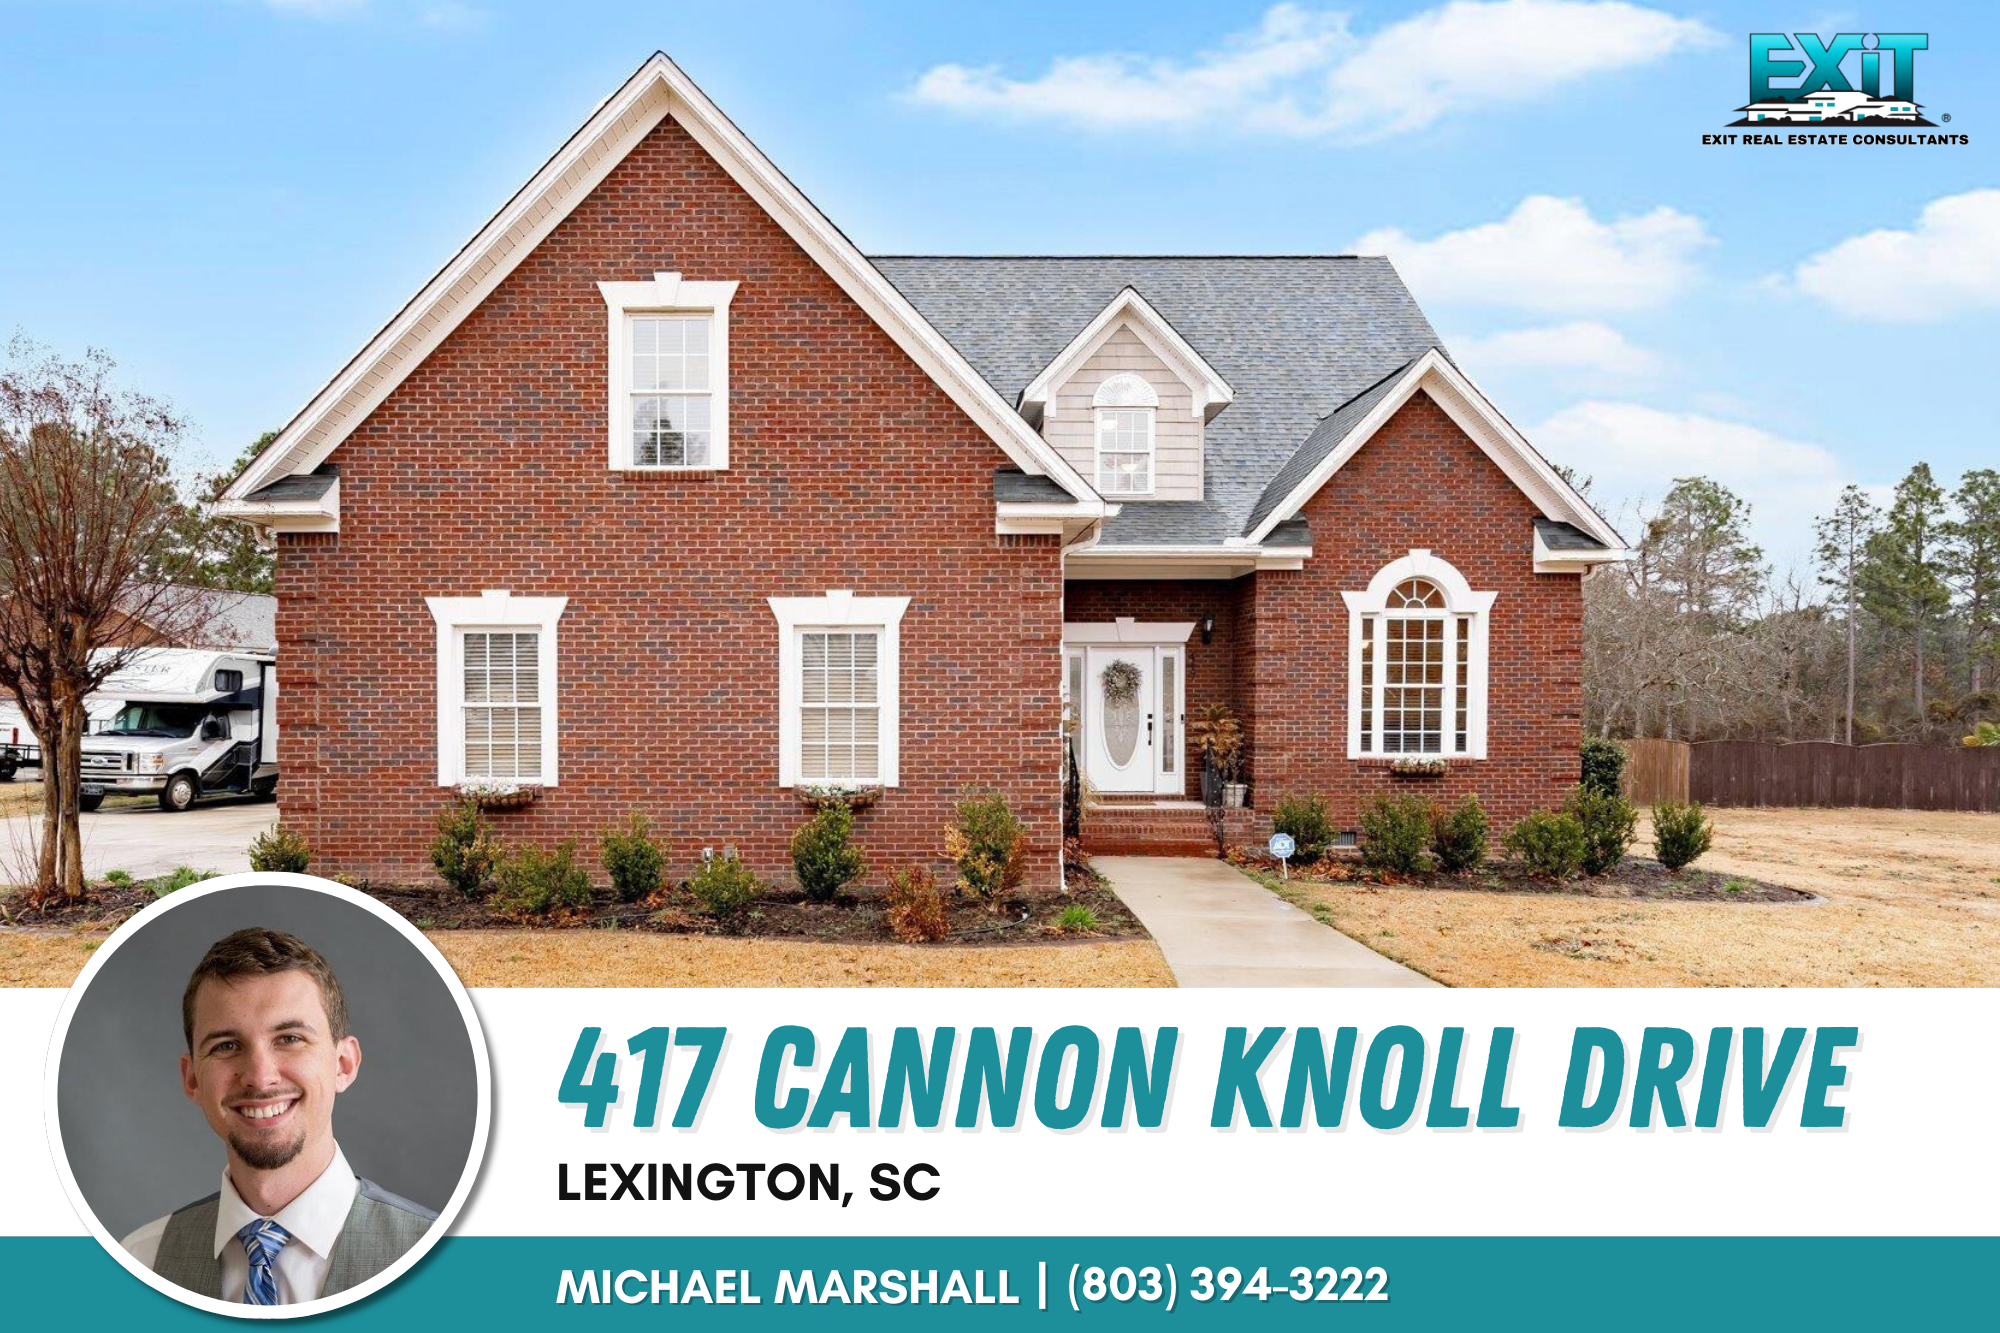 Just listed in Cannon Knoll